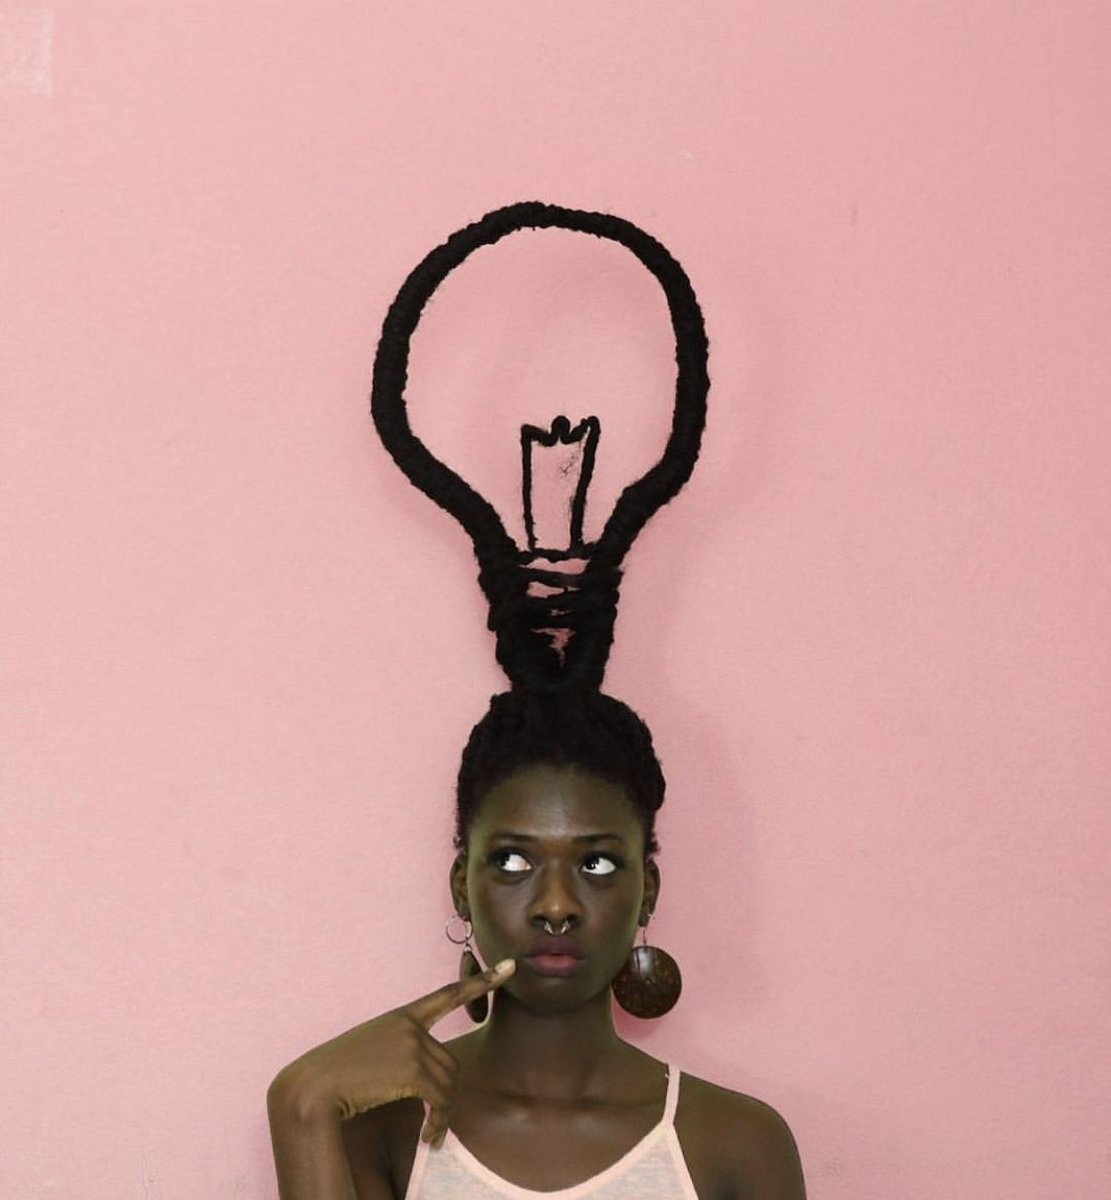 Laetitia Ky ( @laetiky) is a Côte d’Ivoire based hair sculptorShe was inspired by hairstyle worn by pre-colonial African tribes. "Things have come a long way, but even today kinky hair is taboo for some Africans. I want to look back to our traditions and draw from them”